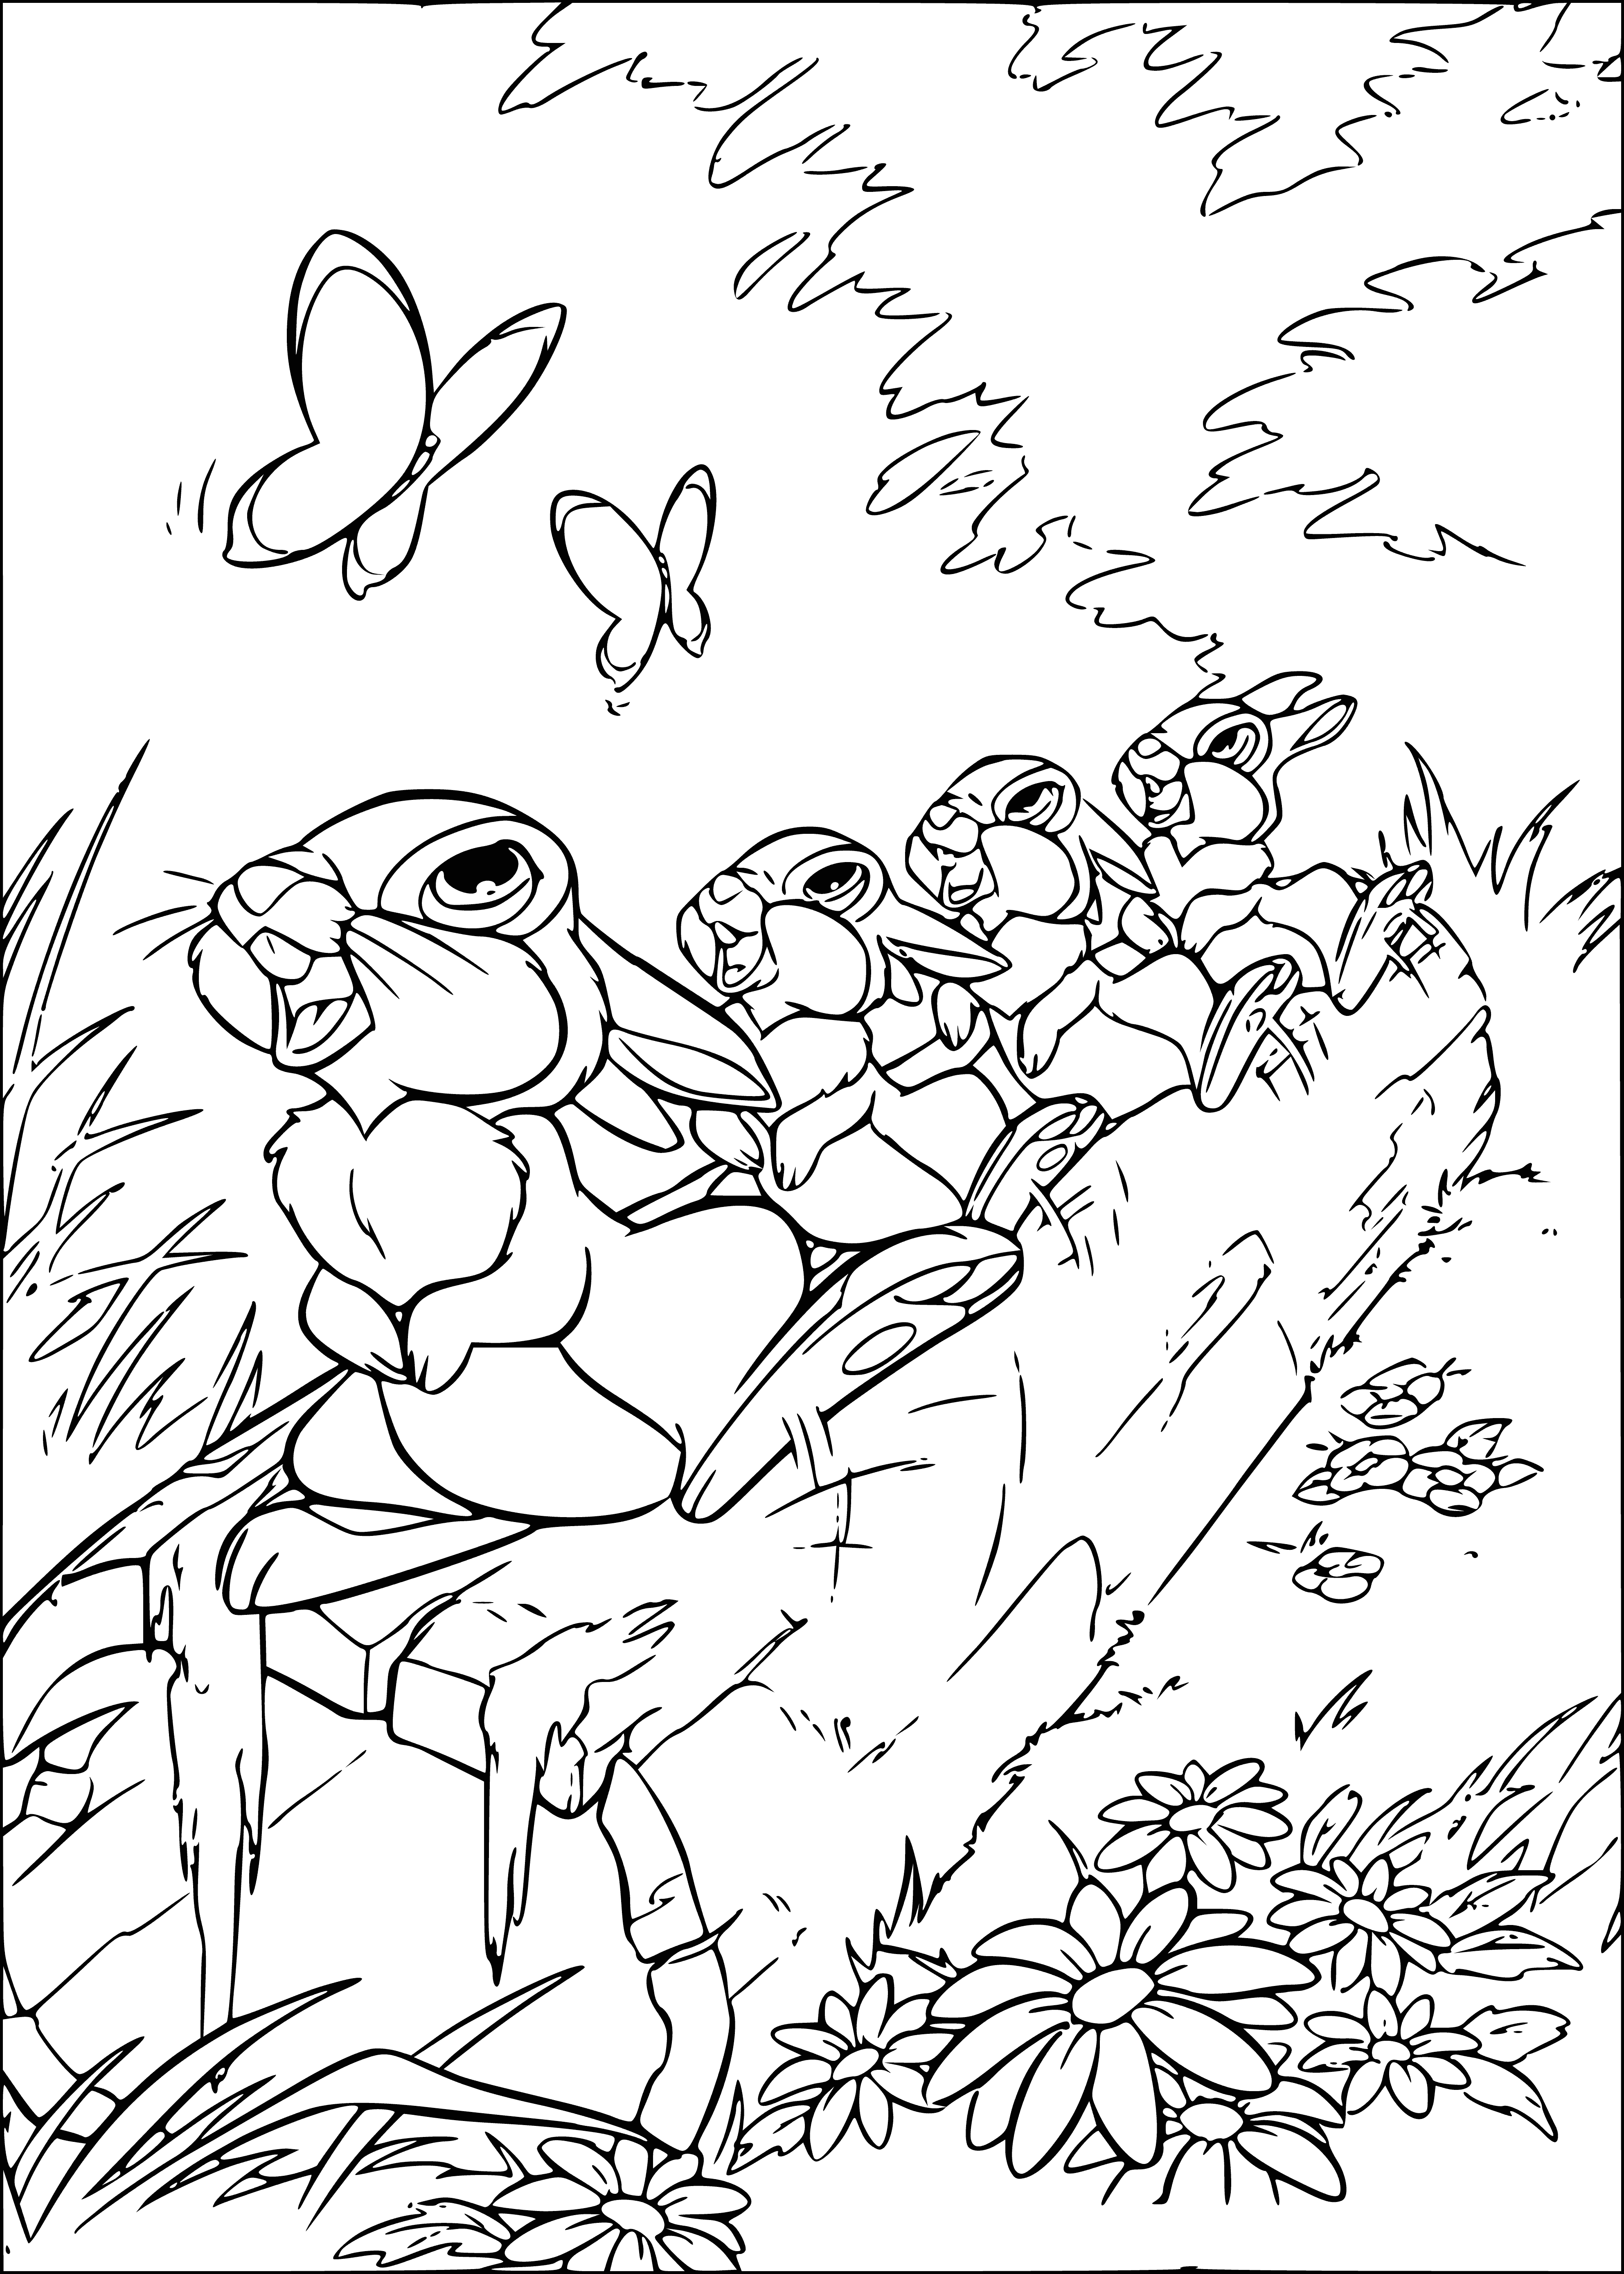 coloring page: Bambi's enthralled watching happy hares drumming, their excitement contagious.